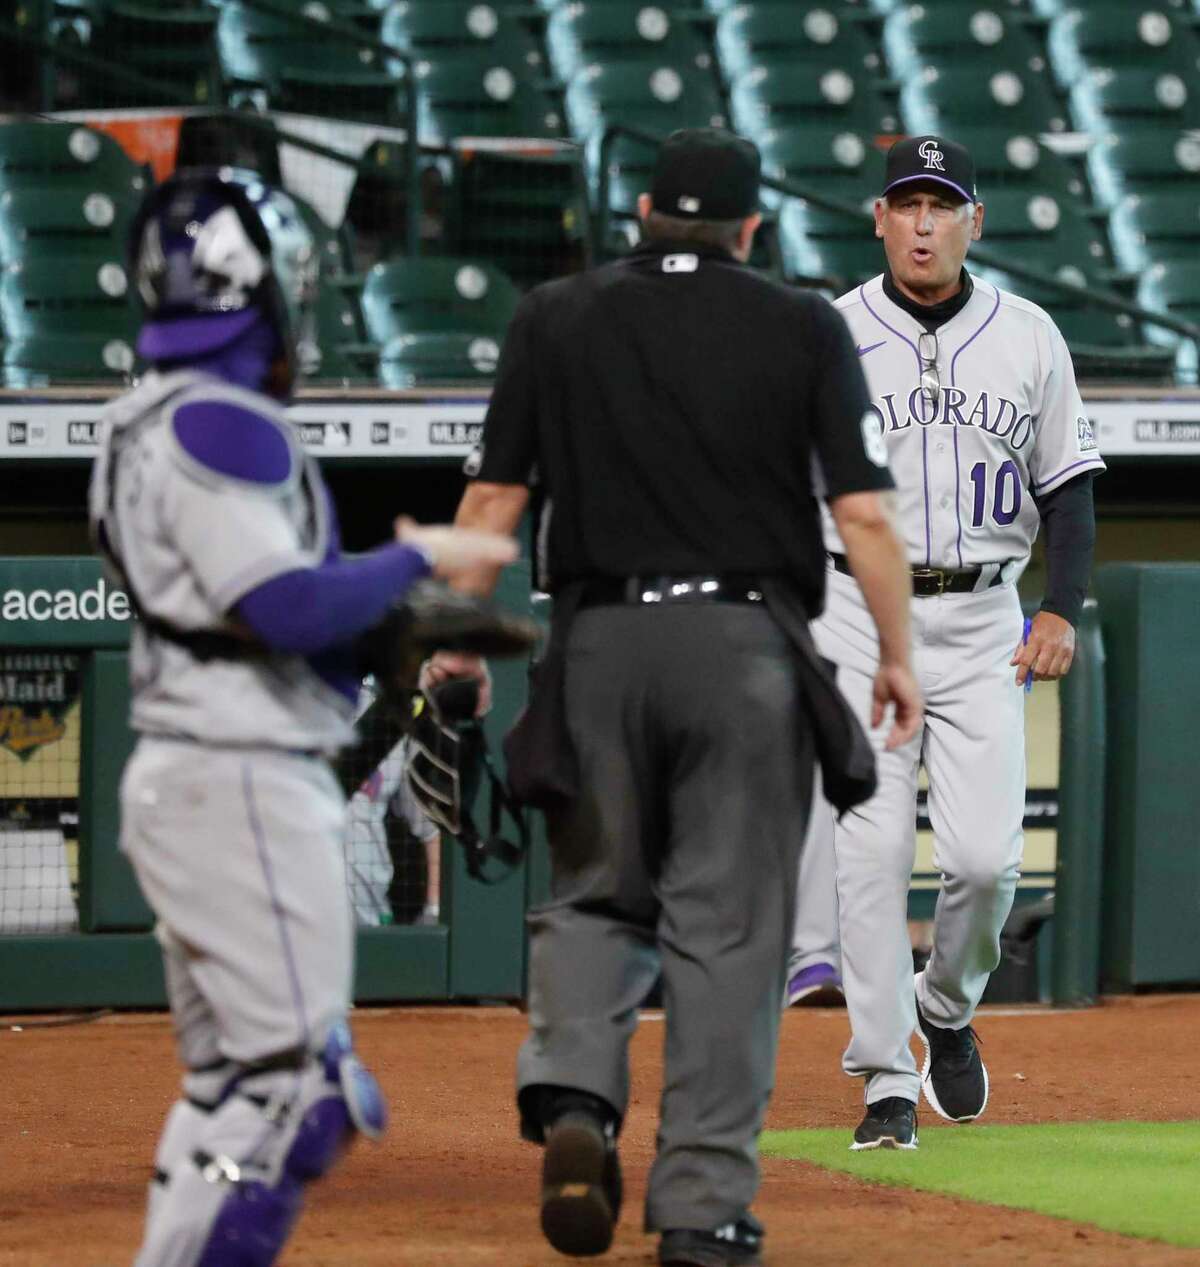 Rockies' Charlie Blackmon hits hot streak after returning from COVID-19